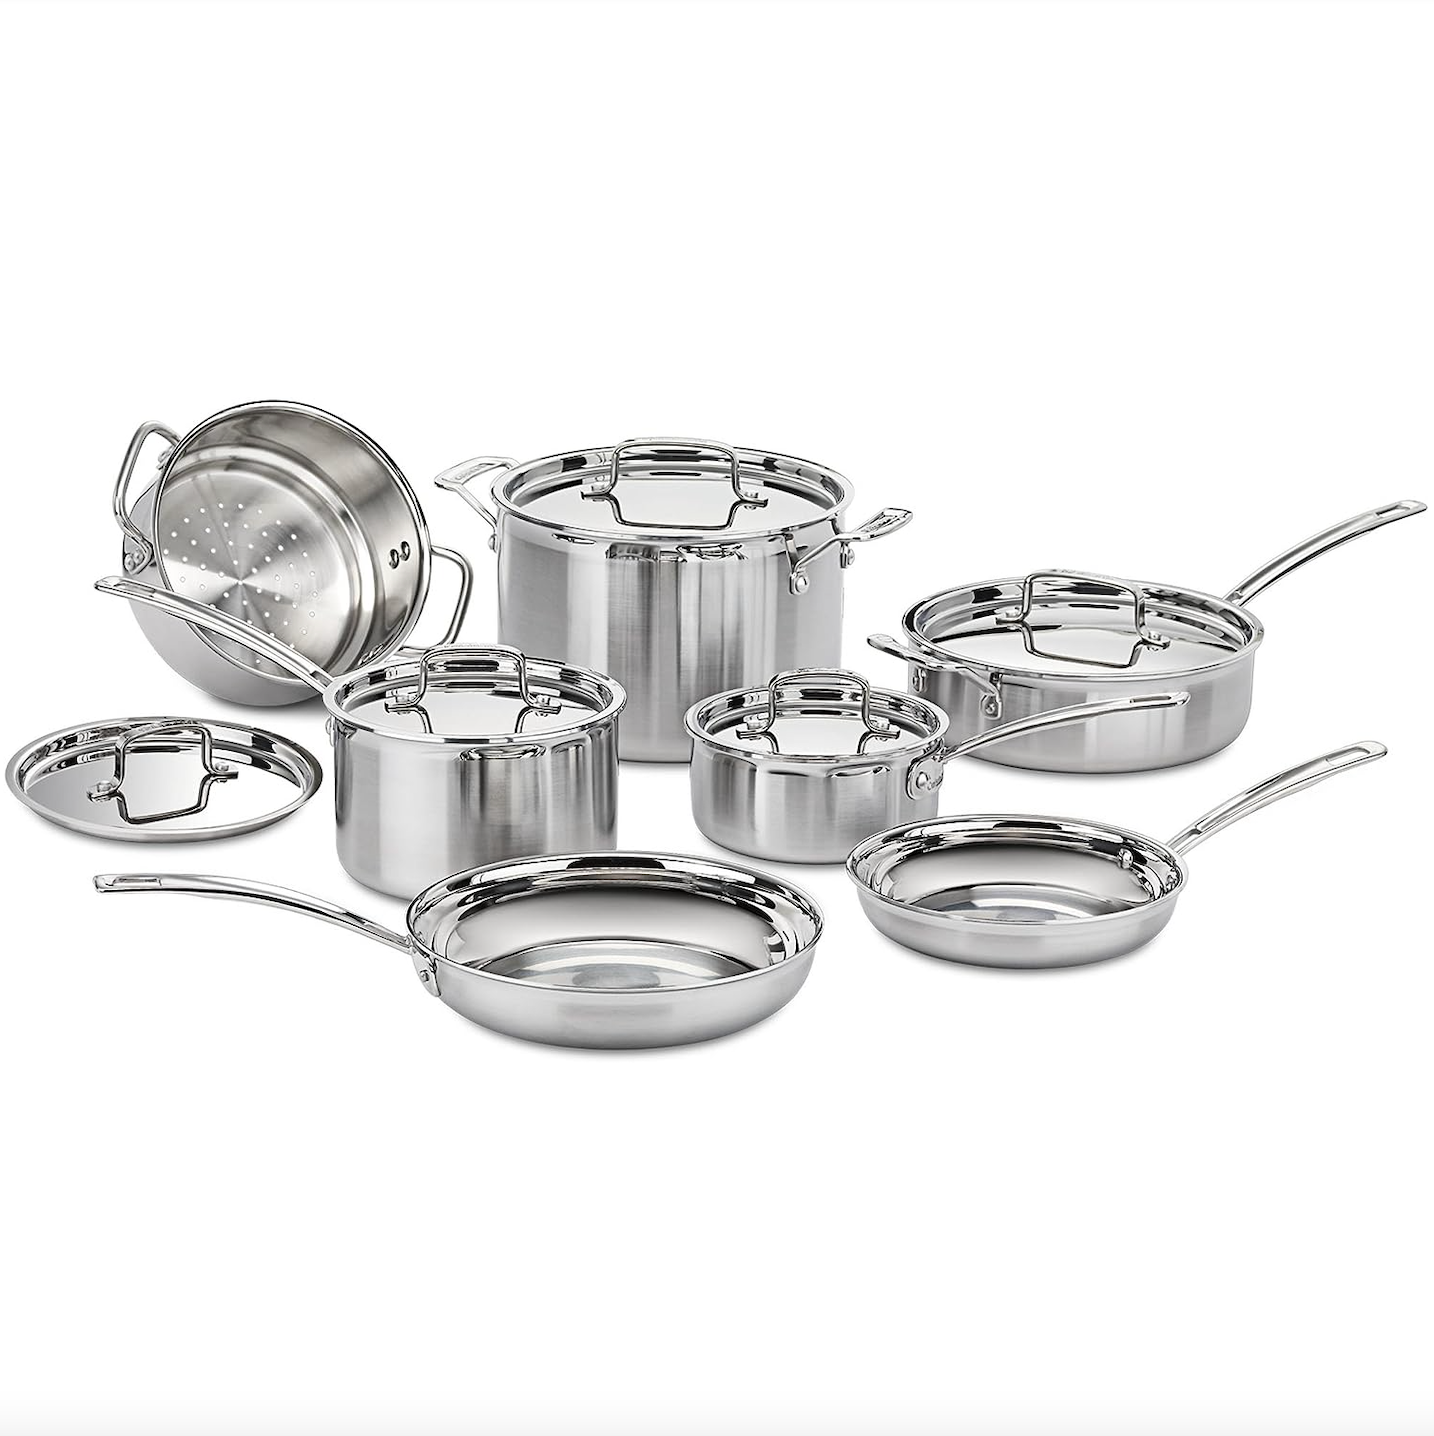 CAROTE Nonstick Cookware Sets, Oven Safe (White 5 PCS) - $30